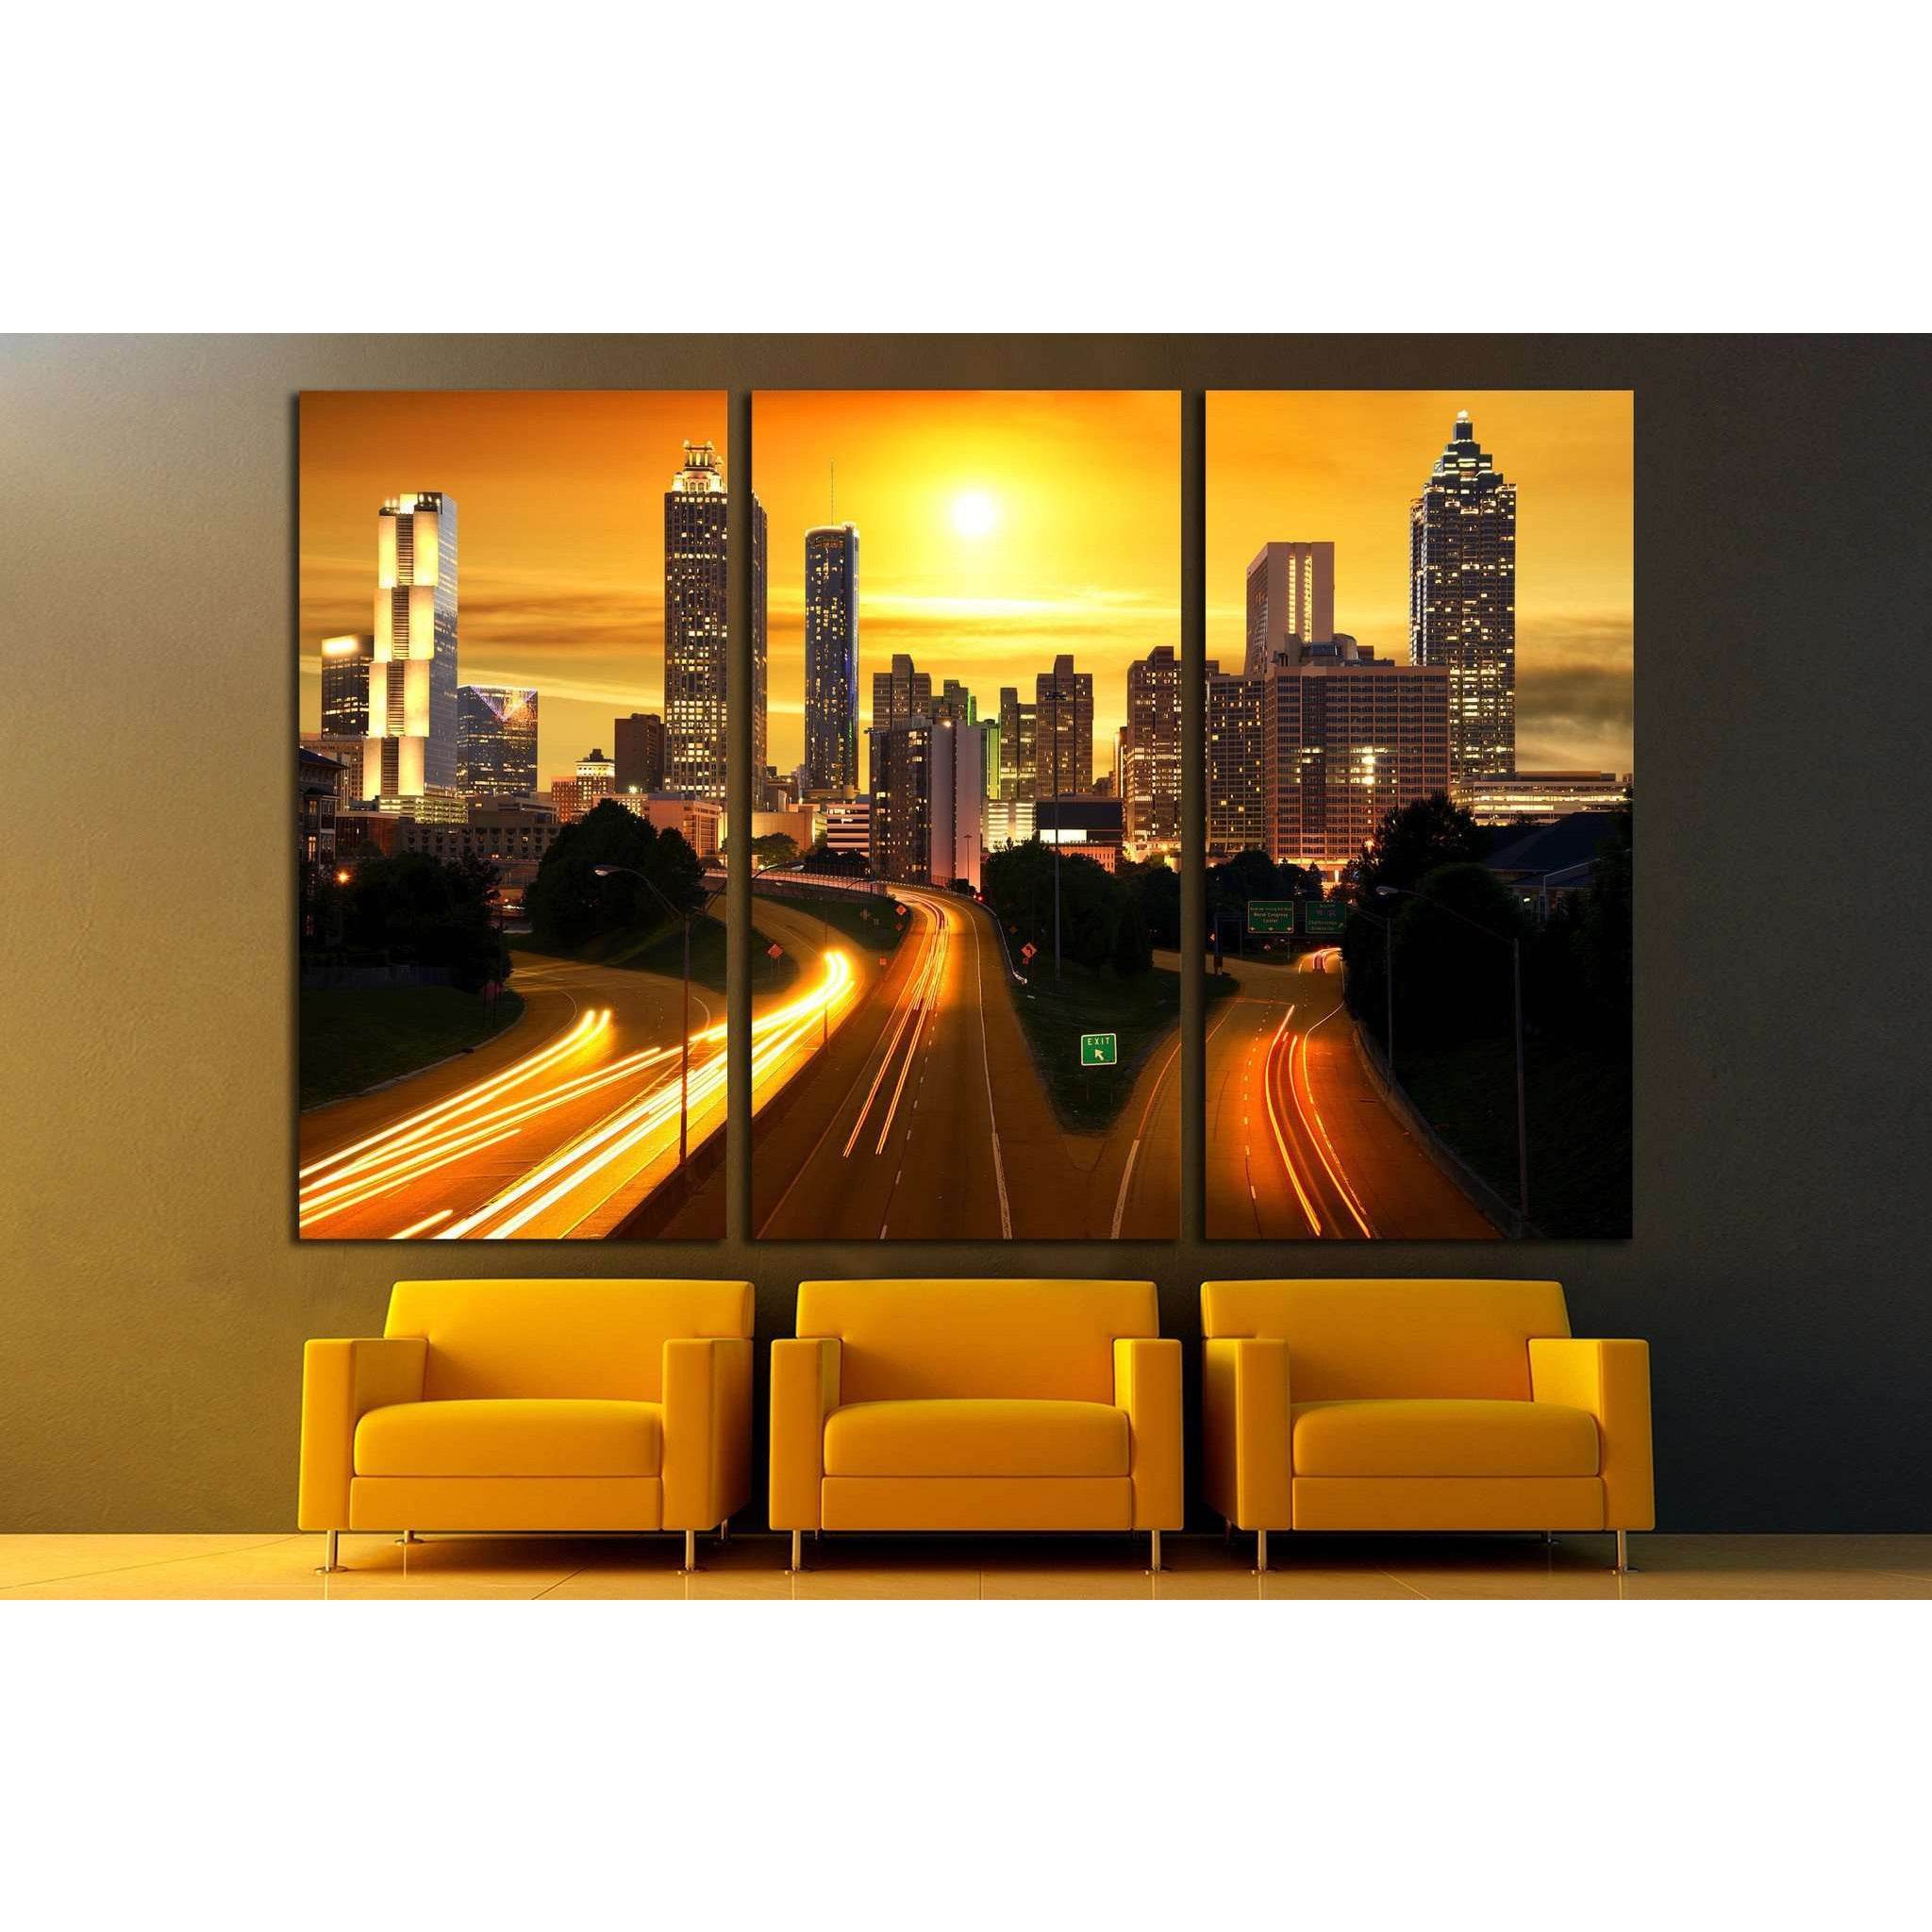 Sunset in Atlanta, United States №1651 Ready to Hang Canvas Print